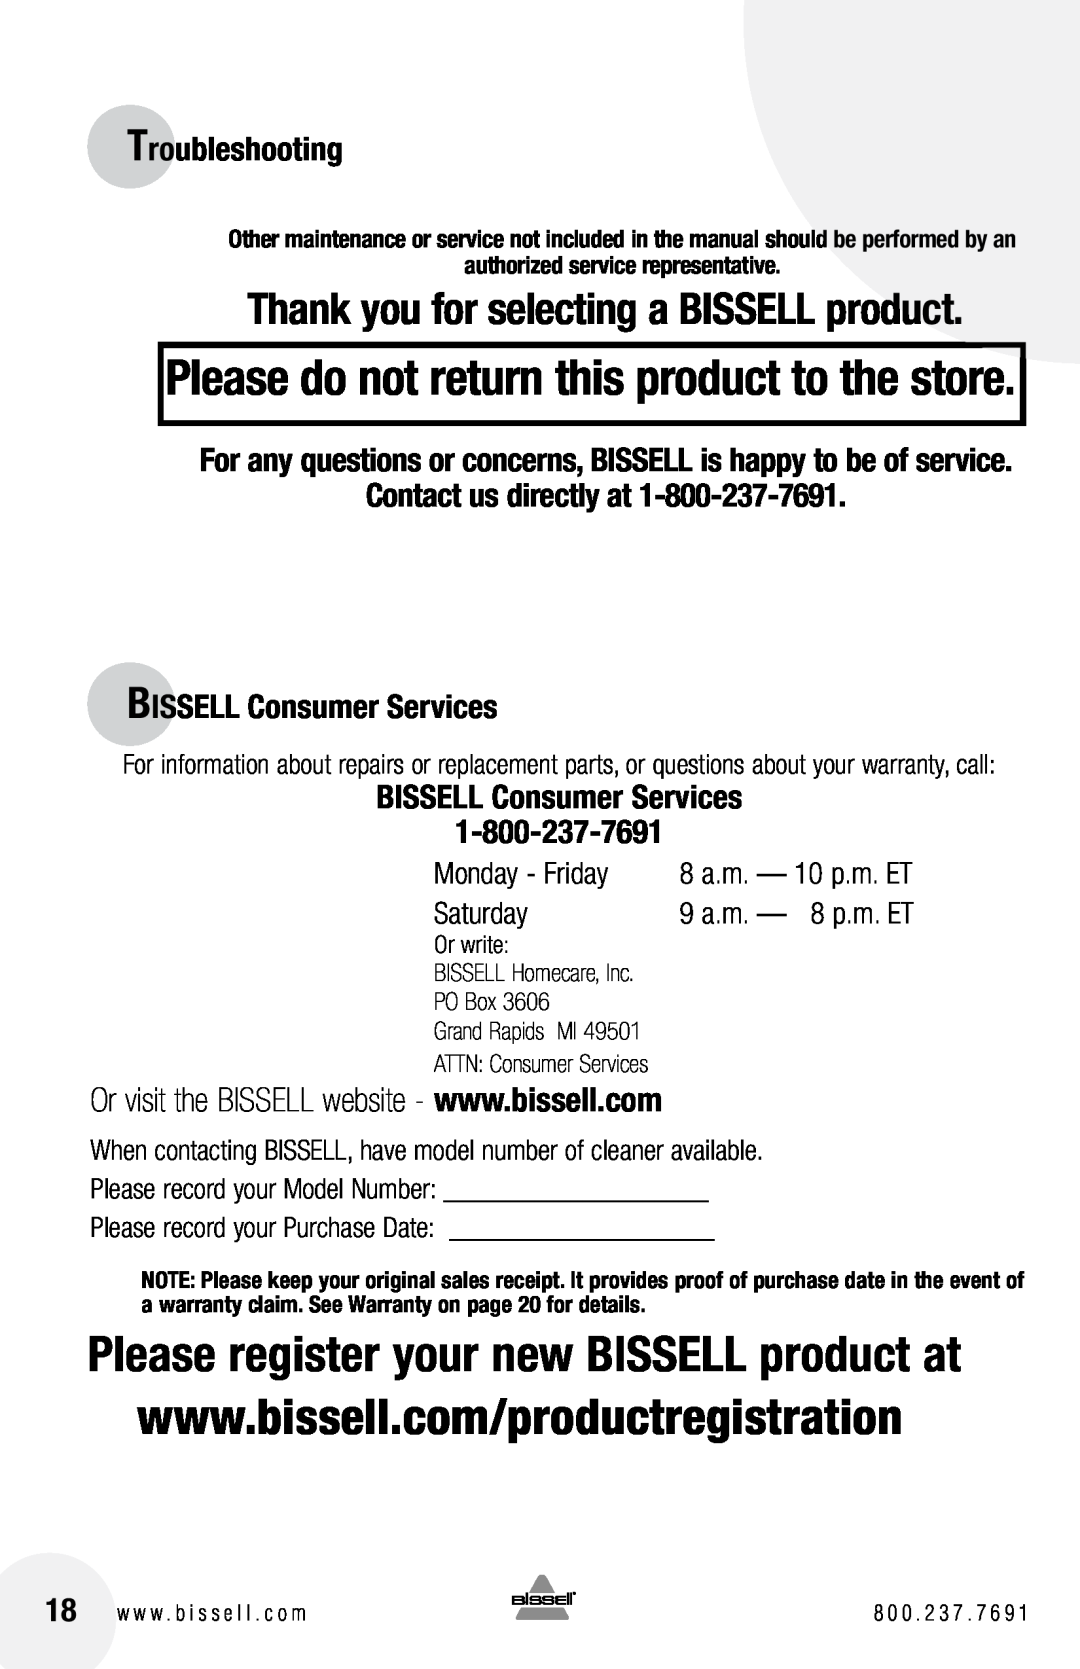 Bissell 6750 Please do not return this product to the store, Contact us directly at BISSELL Consumer Services, Saturday 